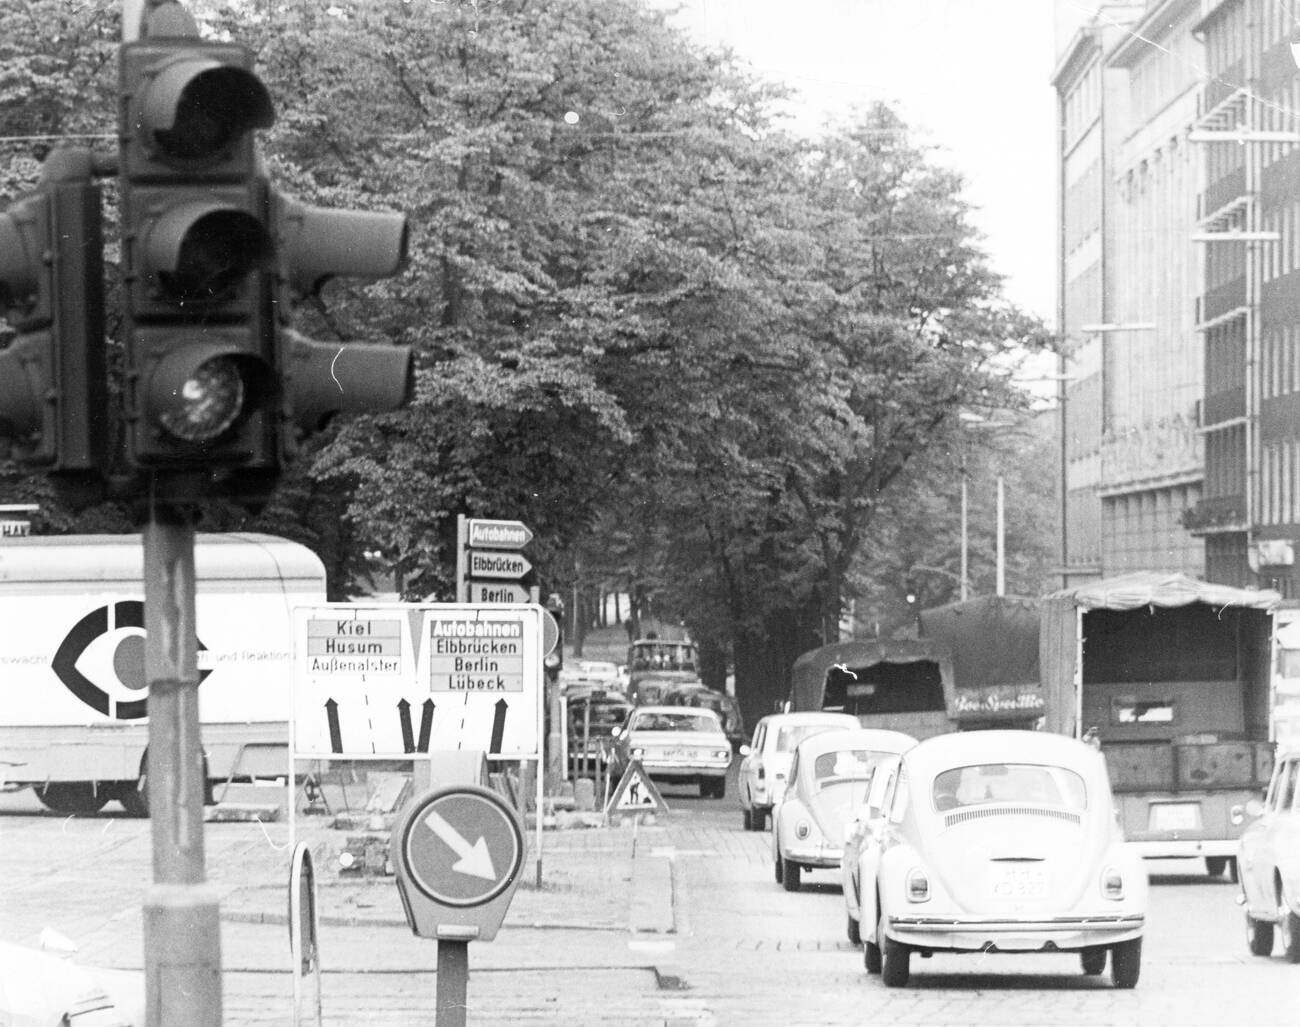 Traffic in the inner city of Hamburg, Germany in the 1970s.